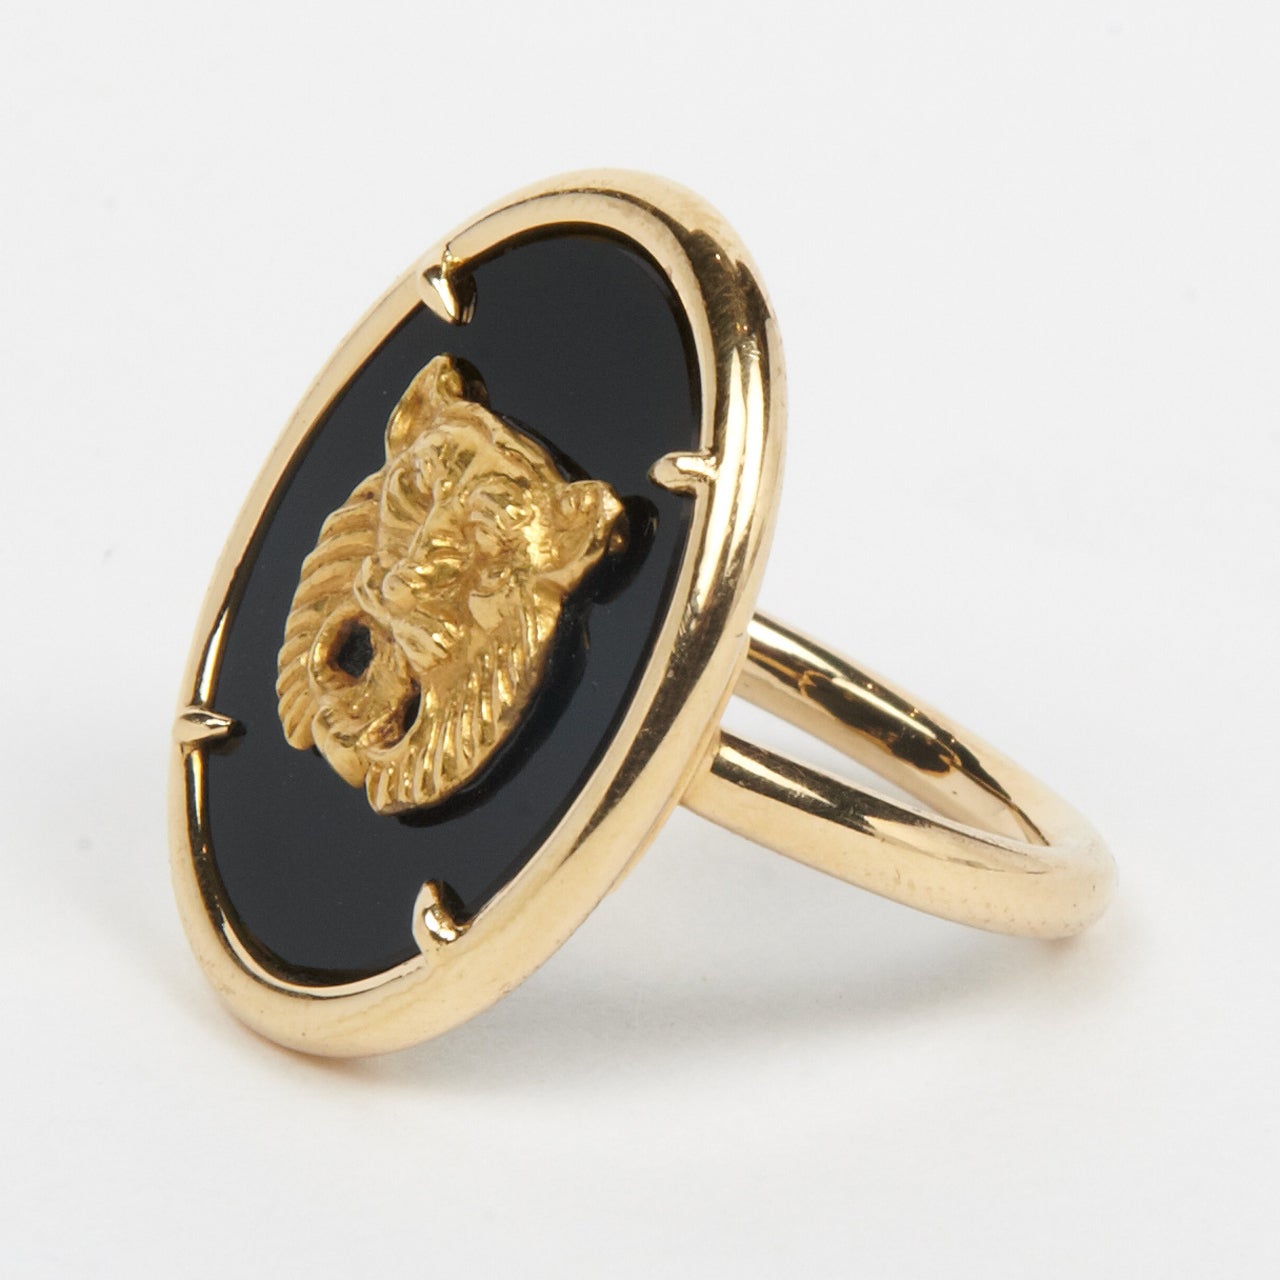 GOLD & ONYX RING WITH ANTIQUE LION HEAD 3